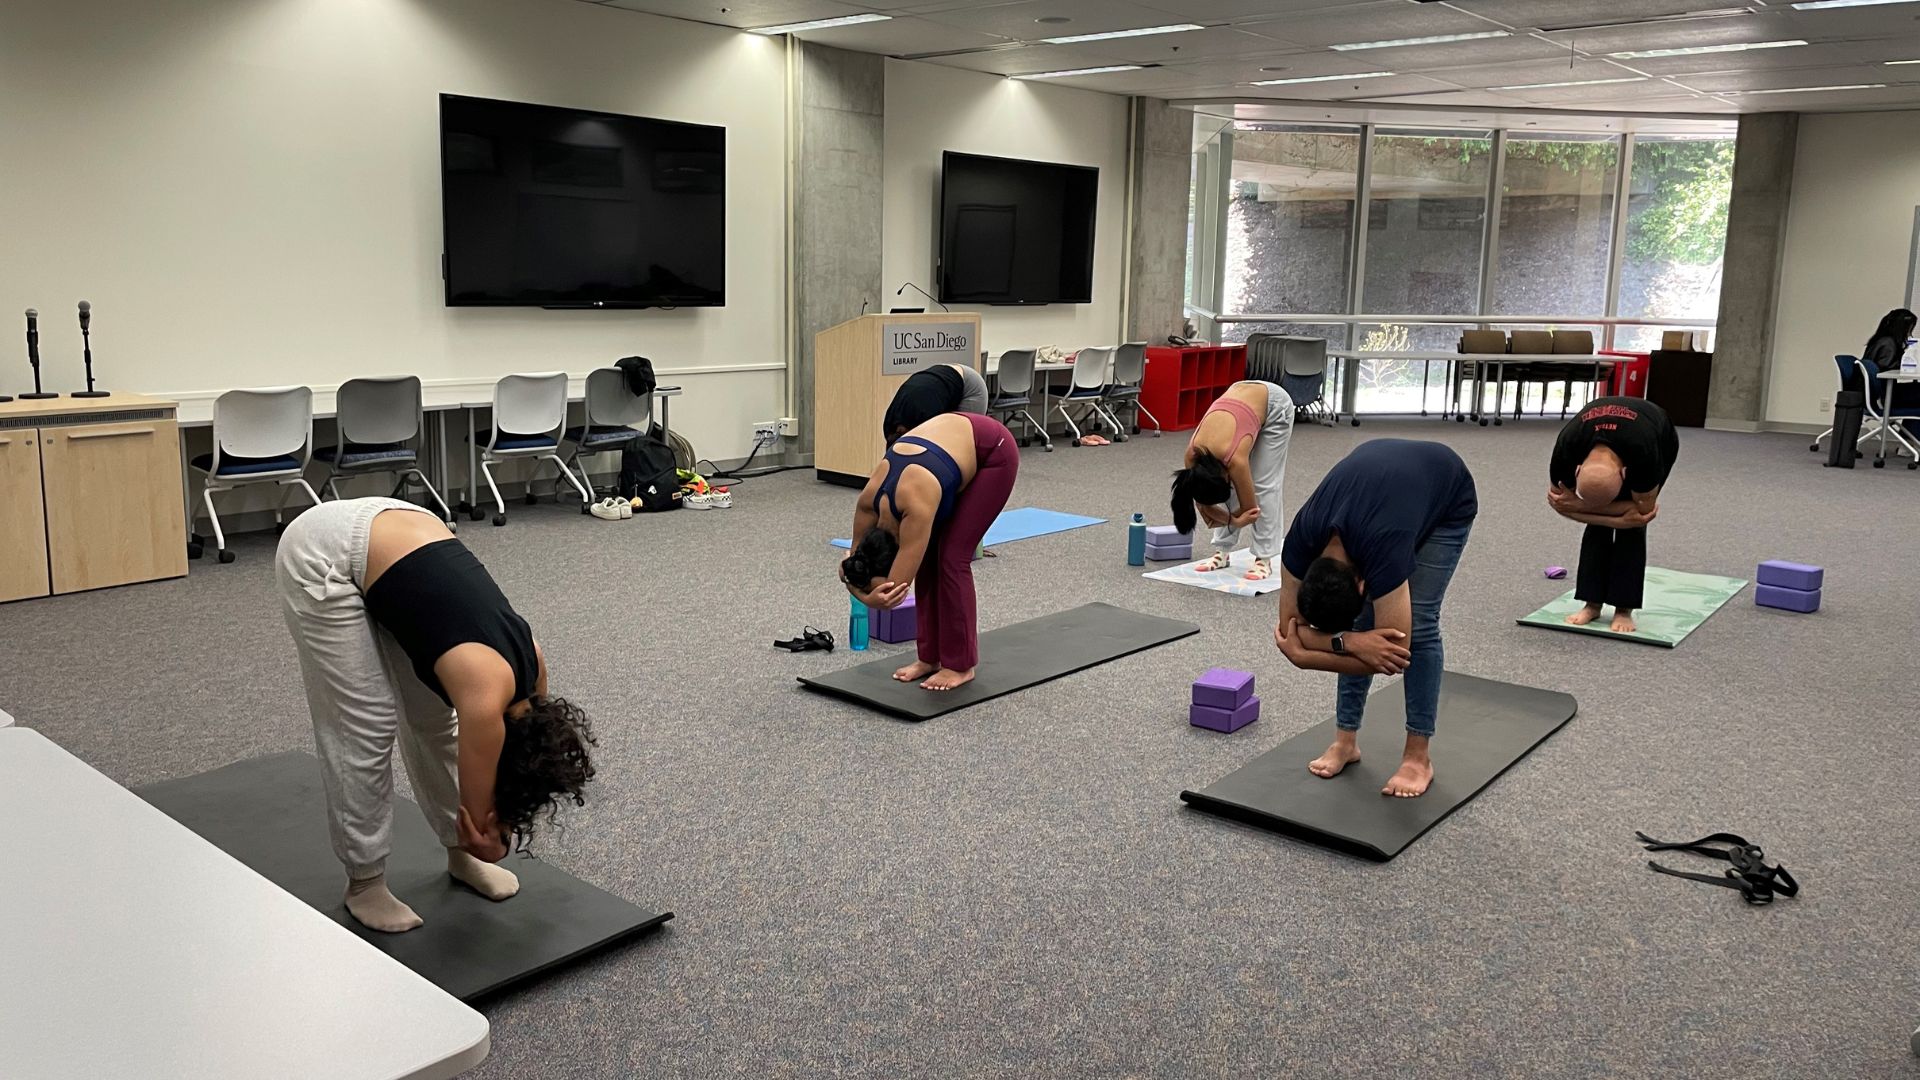 Image of yoga session taking place in the Geisel Meeting Room at Geisel Library,